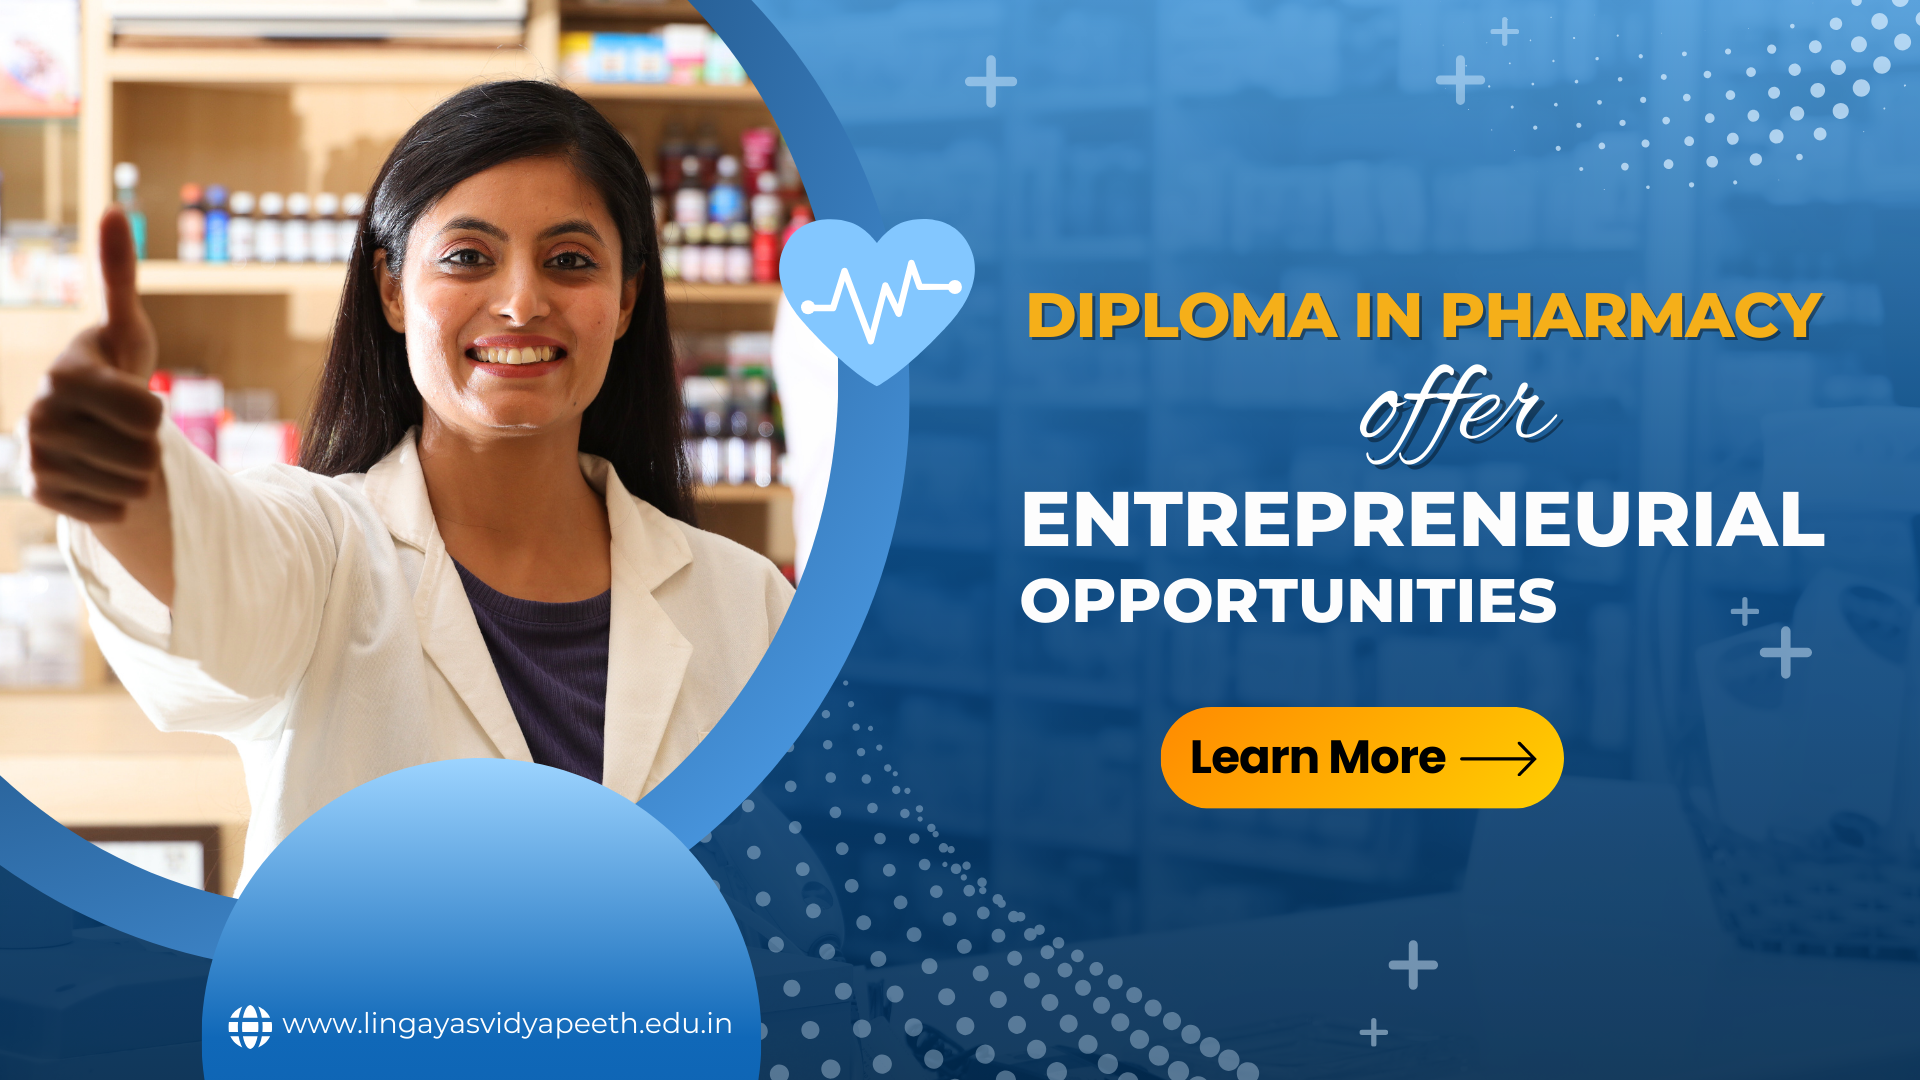 How a Diploma in Pharmacy Can Offer Entrepreneurial Opportunities?